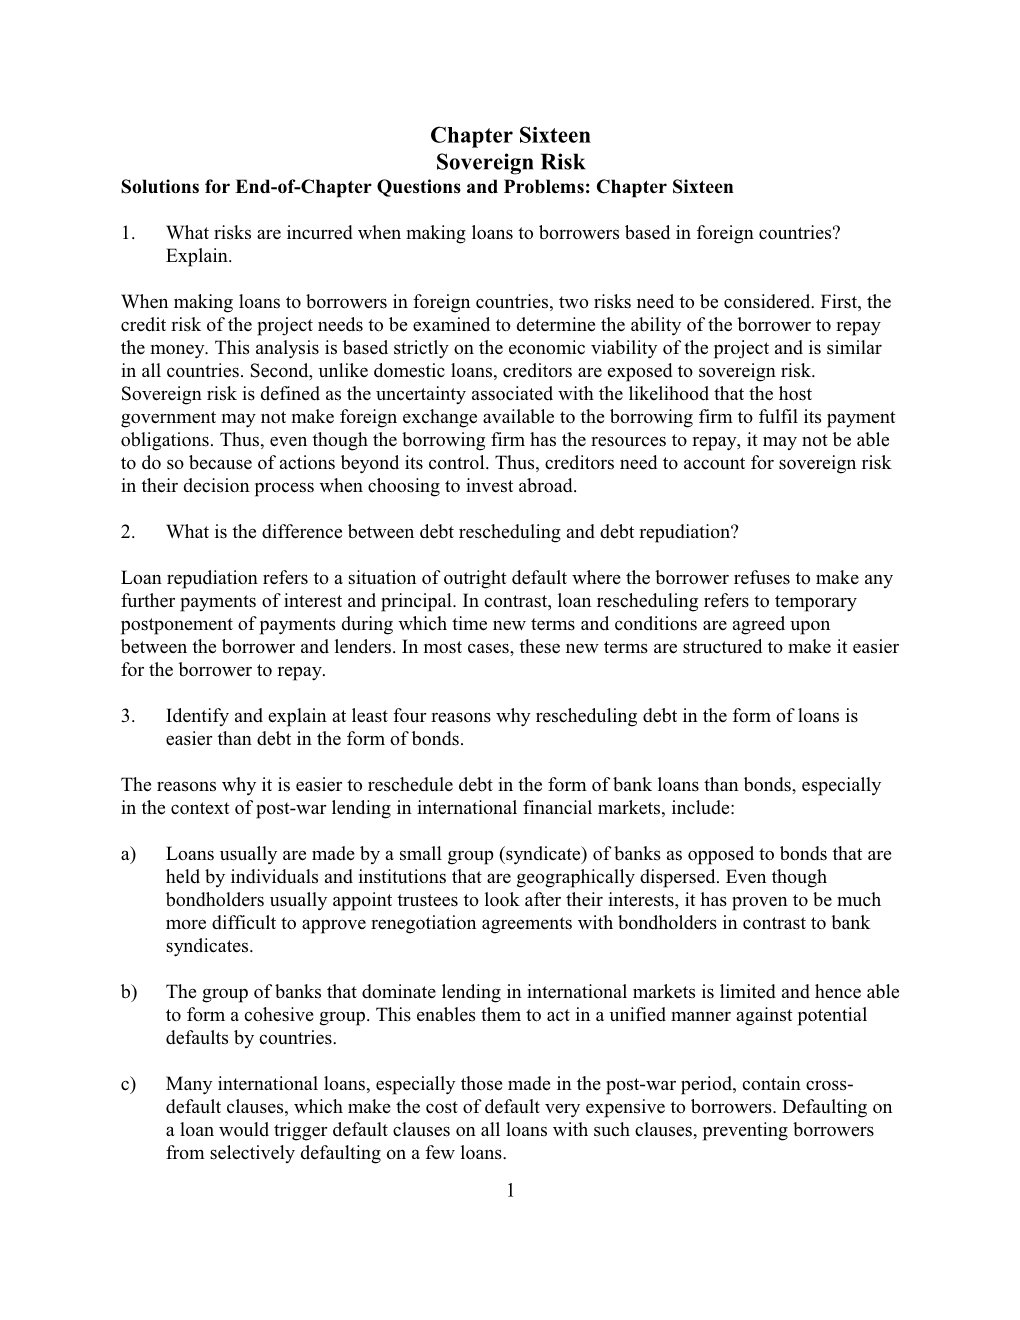 Discussion Questions and Problems for Chapter 16